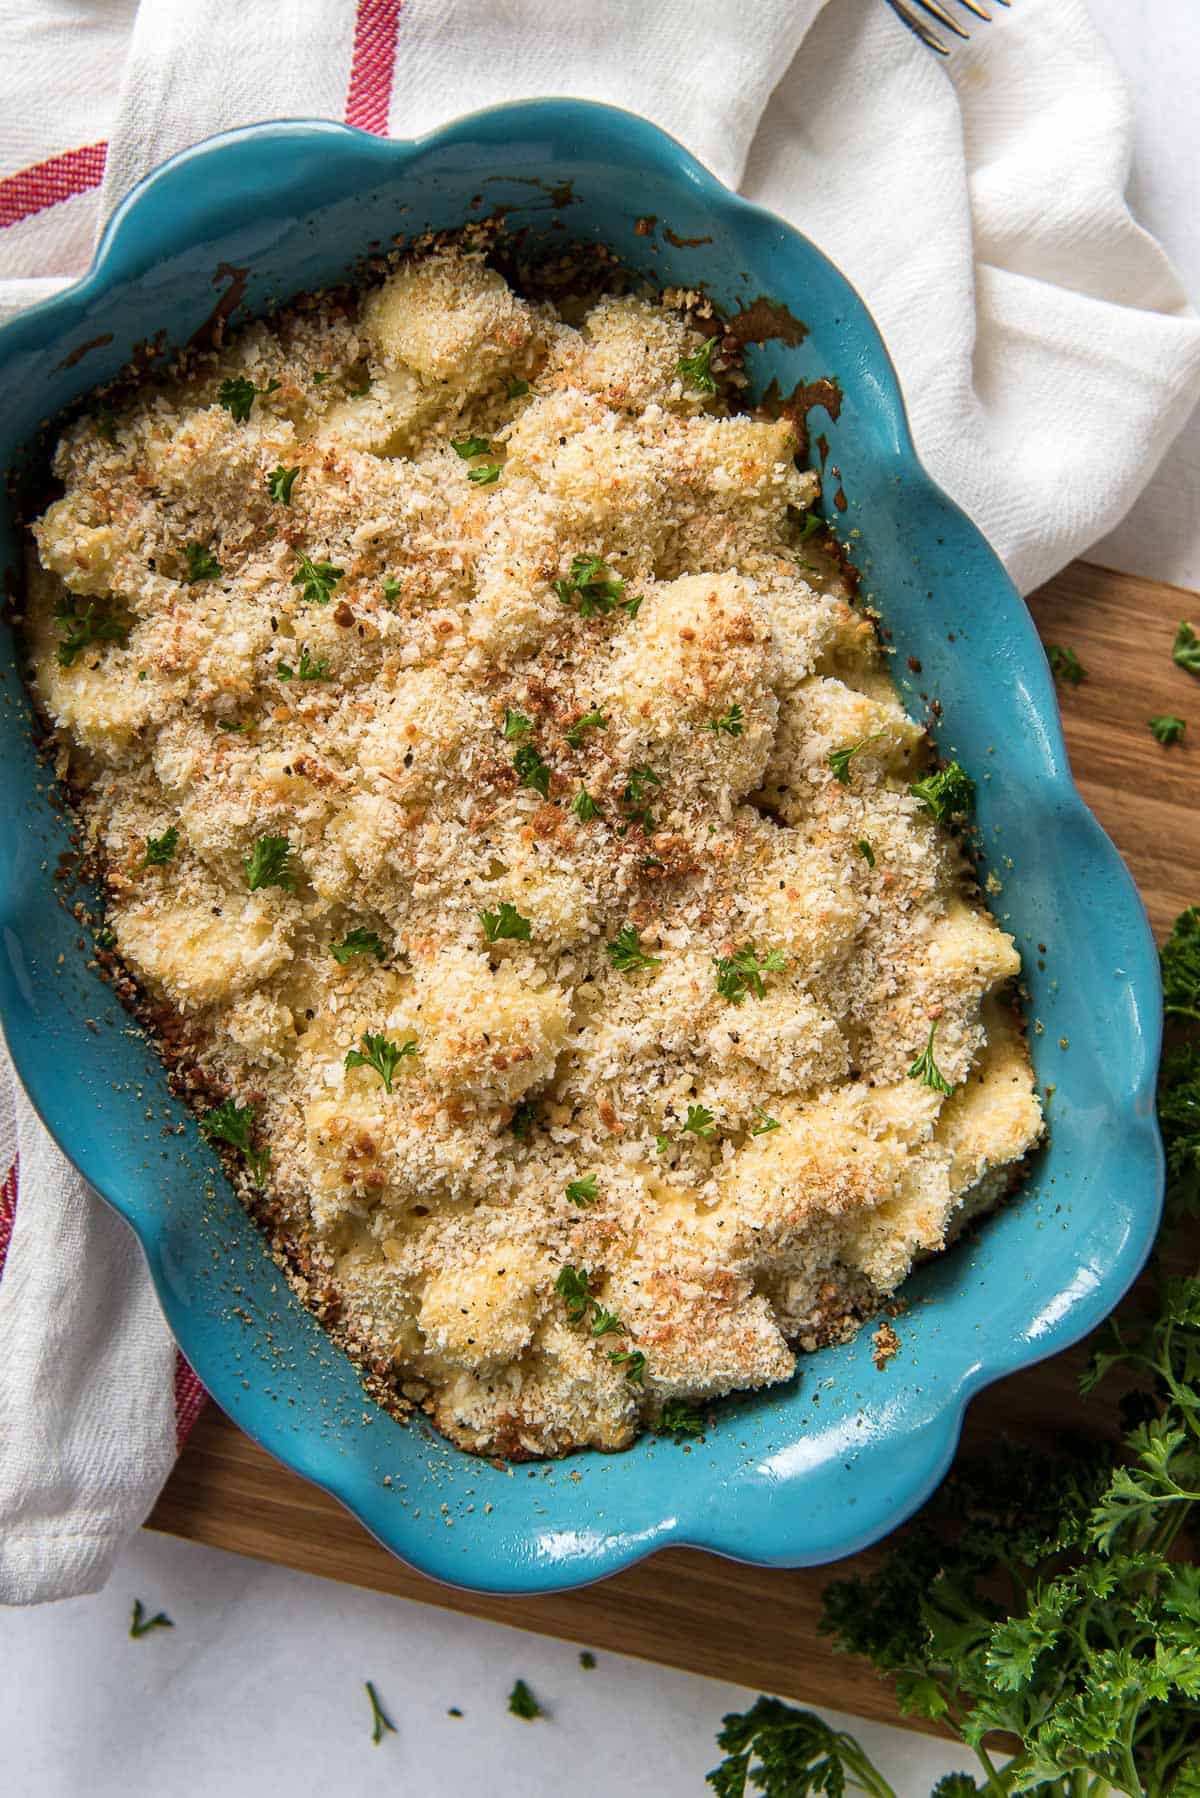 Caulifower casserole topped with bread crumbs in a blue casserole dish.